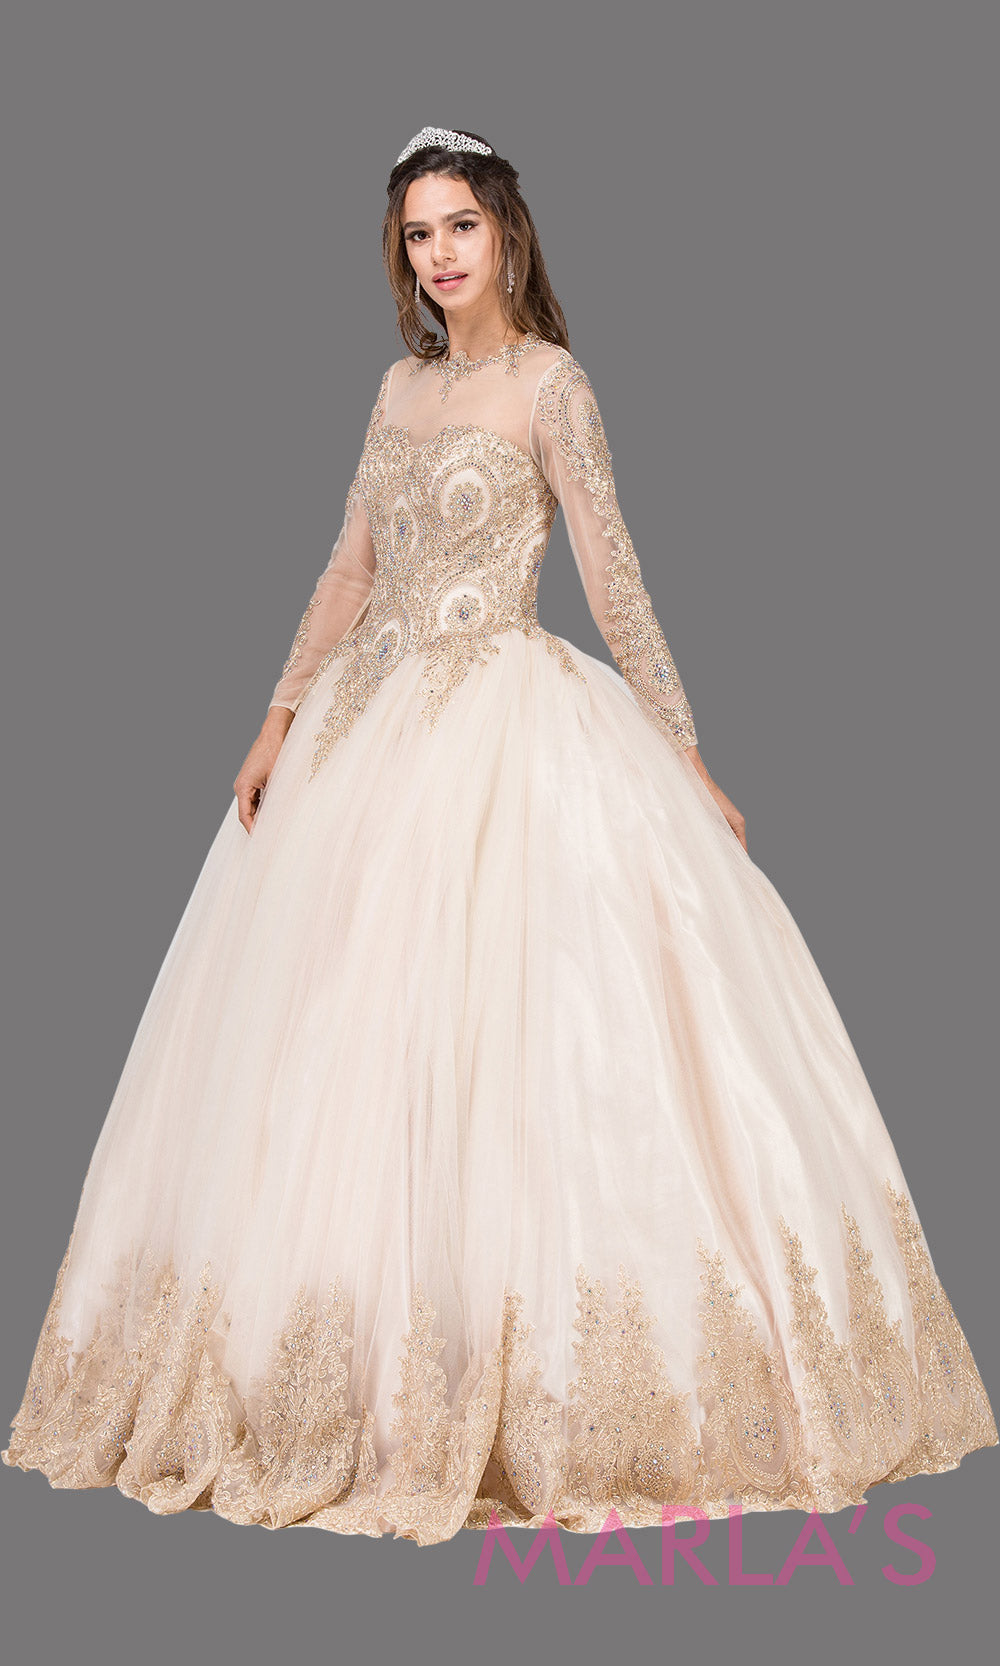 Long sleeve champagne quinceanera ballgown with lace. This high neck corset back light gold ball gown can be worn for Sweet 16 Birthday,Sweet 15, Engagement Ball Gown Dress, Wedding Reception Dress,Debut. Perfect indowestern gown.Plus sizes Avail.